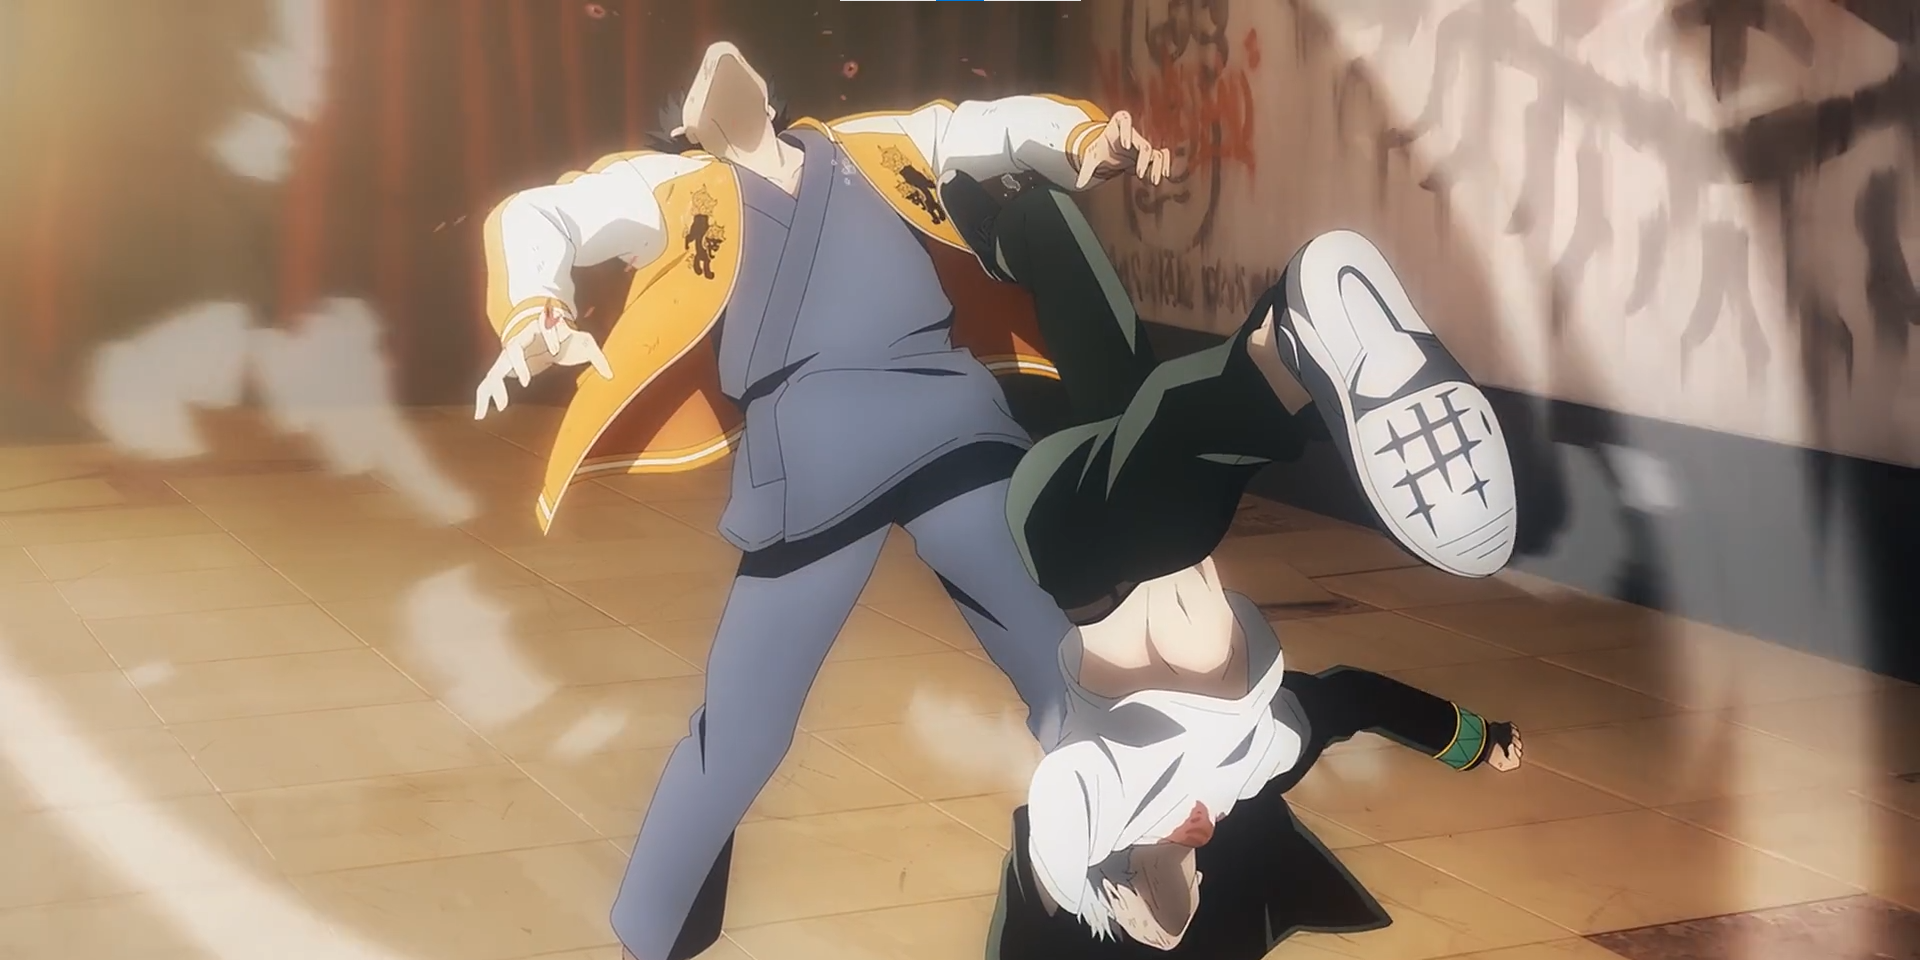 Haruka flips backwards while kicking Togame in the head hard enough to wrench his head back.